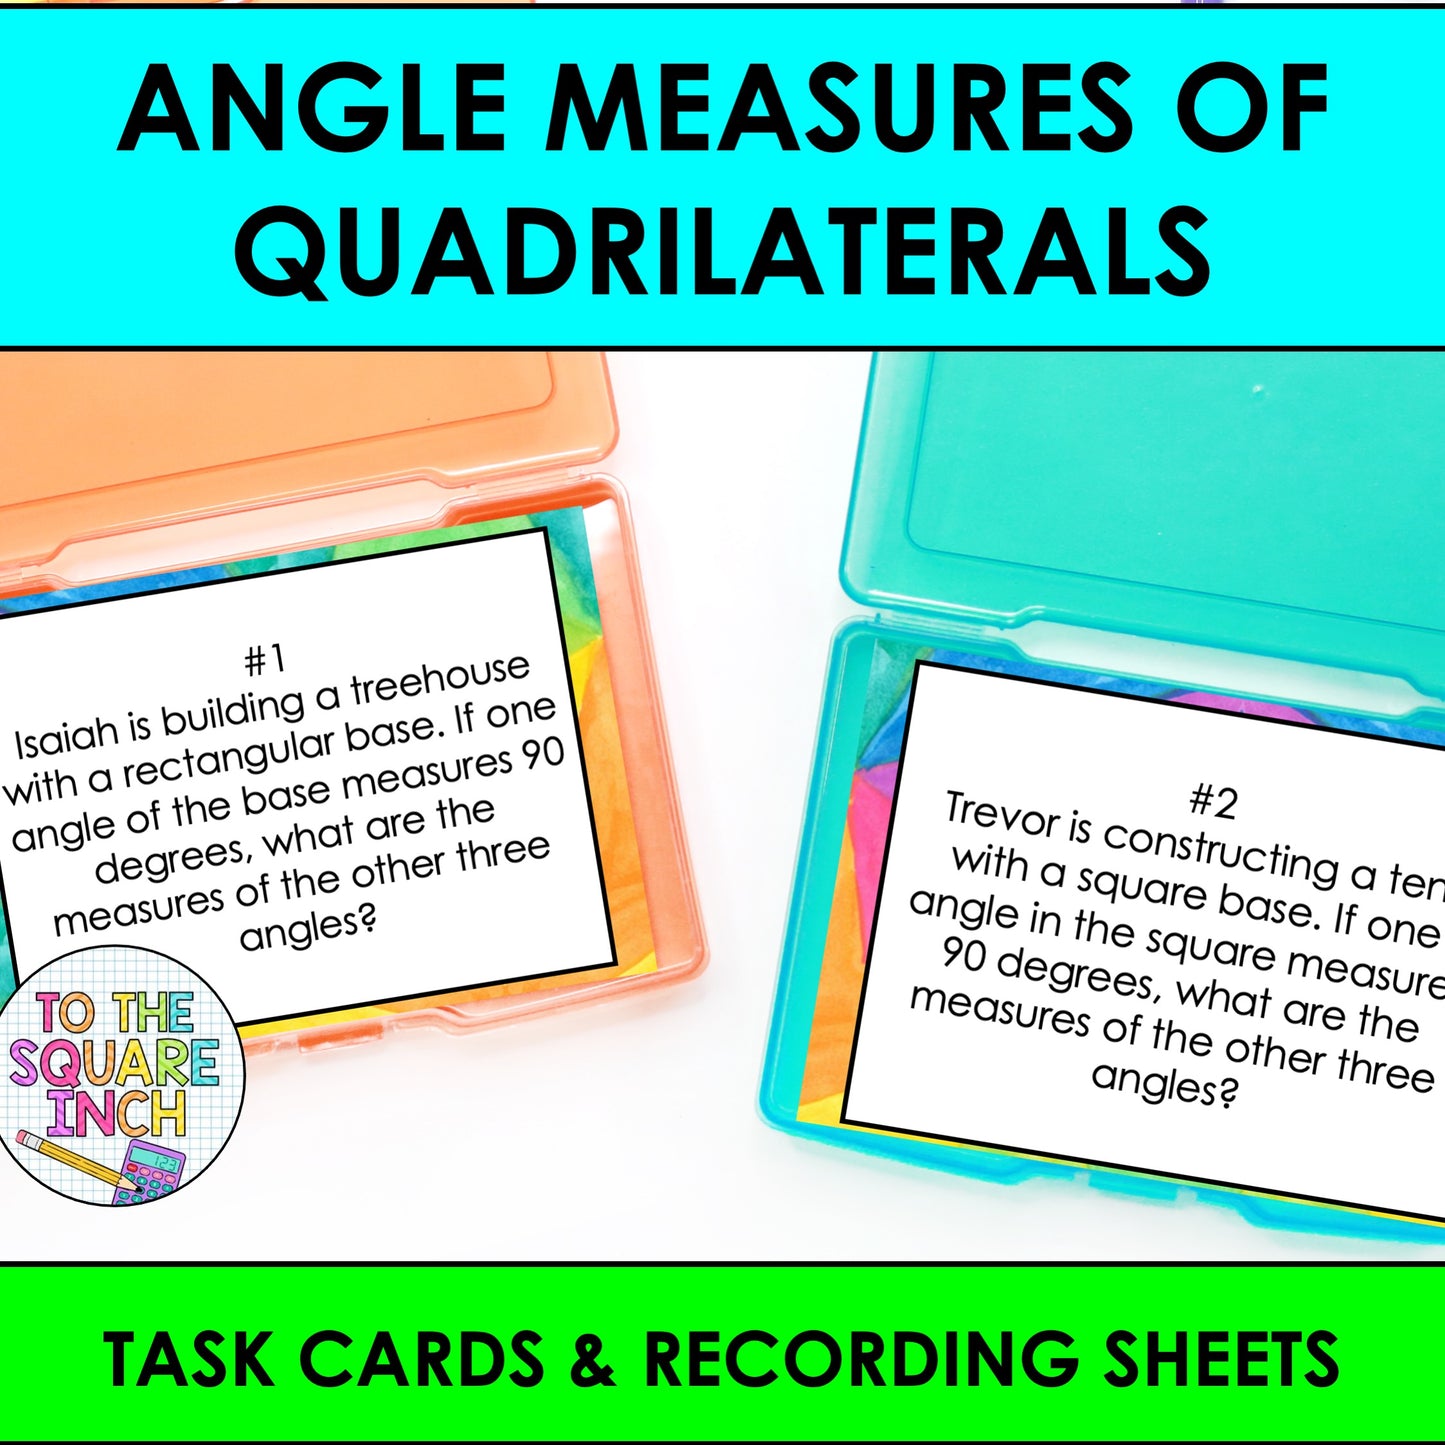 Angle Measures of Quadrilaterals Task Cards